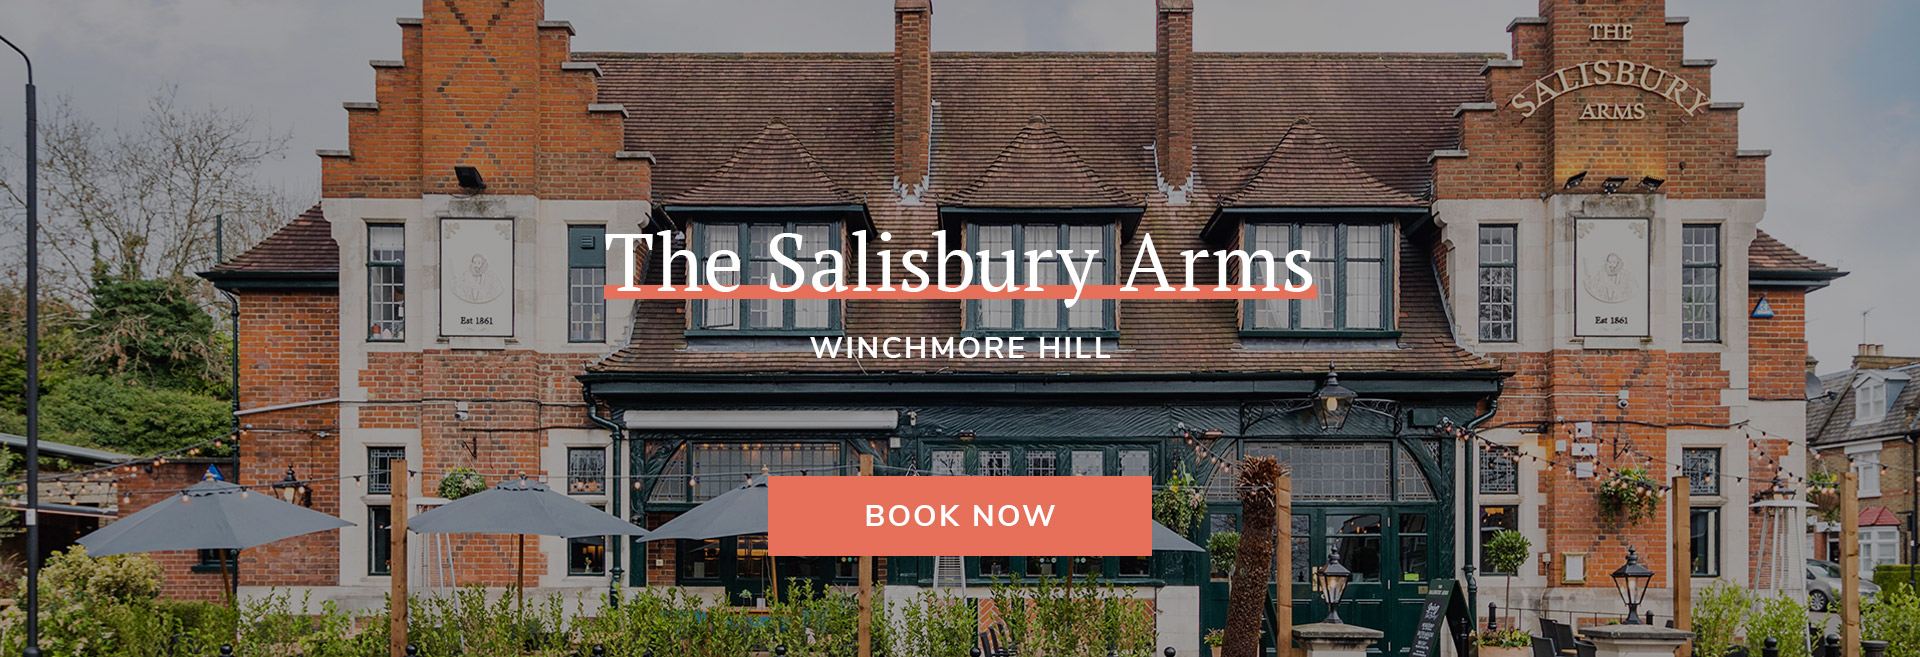 The Salisbury Arms Banner 1